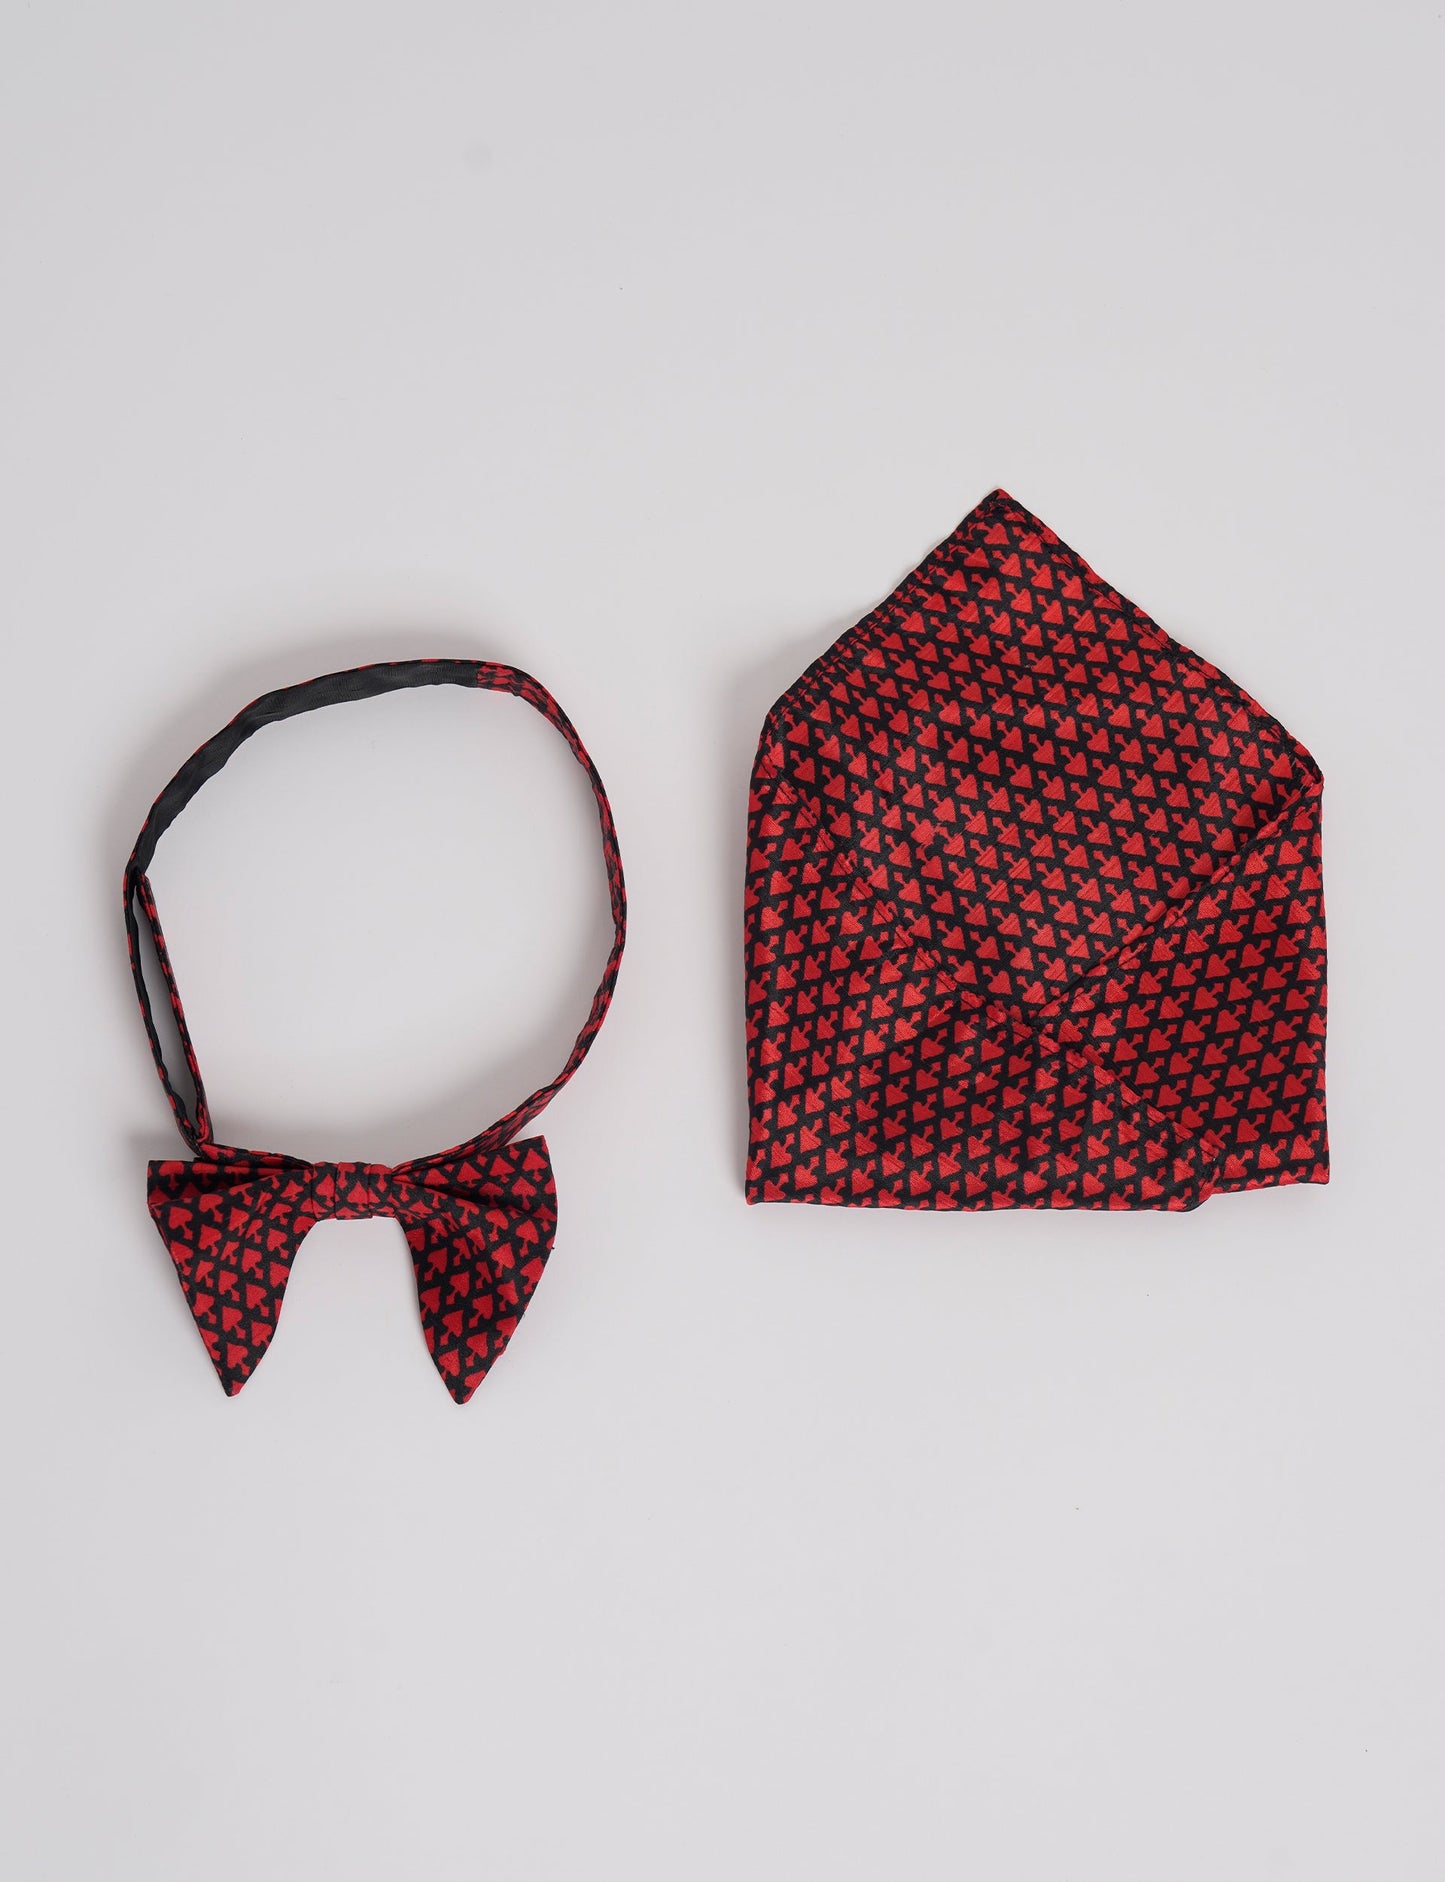 Dapper BOW TIE & POCKET SQUARE SET, ethically handcrafted with lively prints and eye-catching colors. Made by Mumbai-based craftswomen, this ensemble adds excitement to classic formal-wear. Sustainable fashion supporting fair trade, slow fashion, and empowering women artisans. A powerful story of transformation.